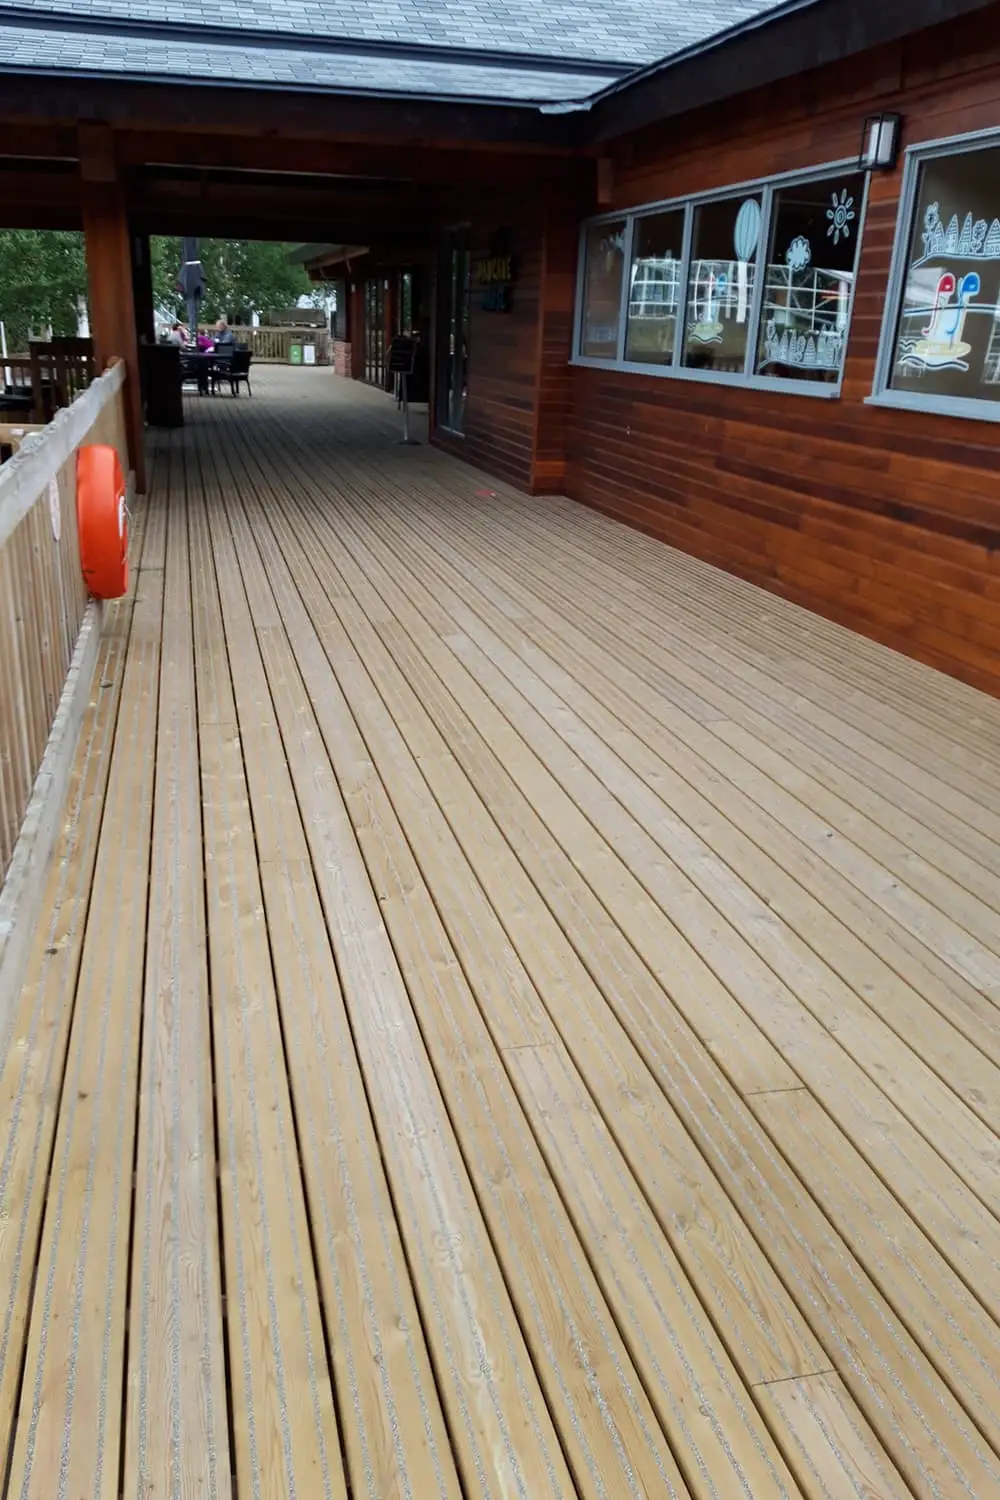 Anti-slip decking hospitality area at Center Parcs Whinfell